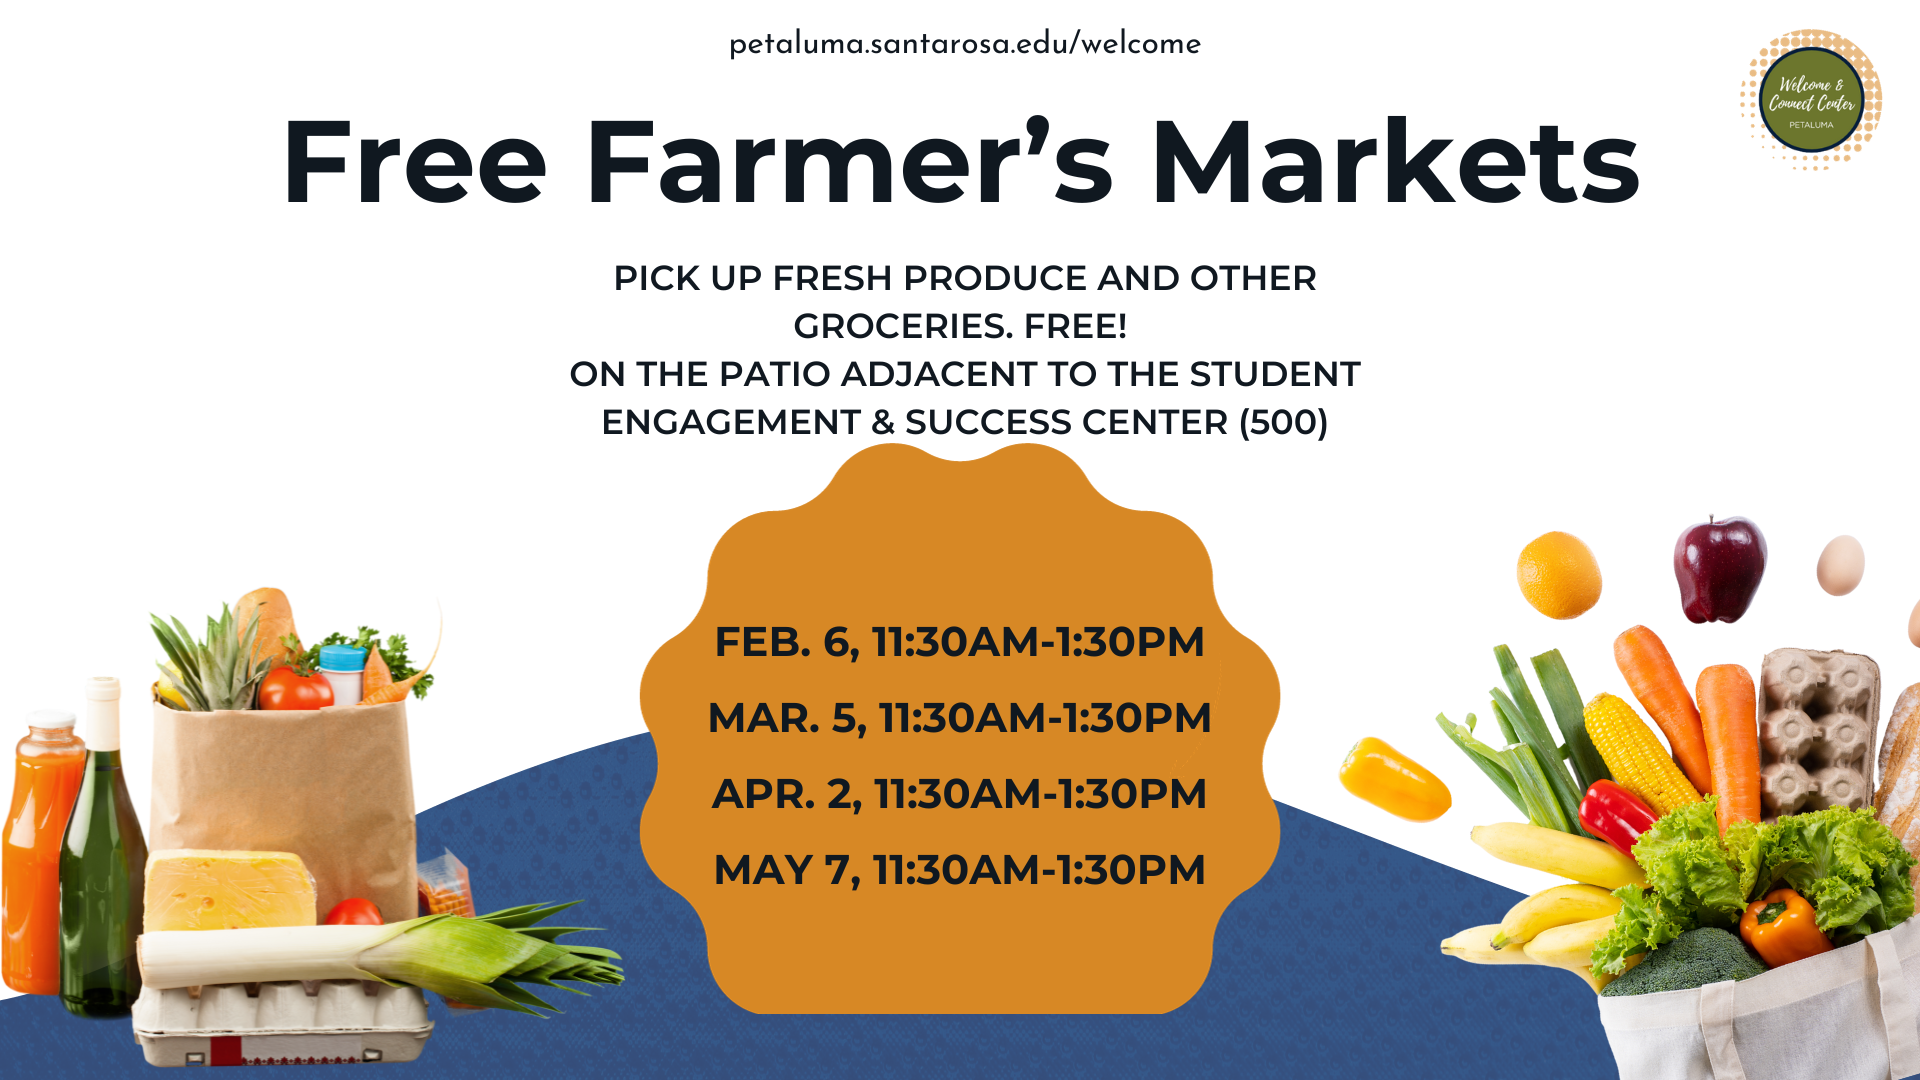 free farmer's market the first tuesday of each month, 11:30-1:30pm in outdoor canopy area